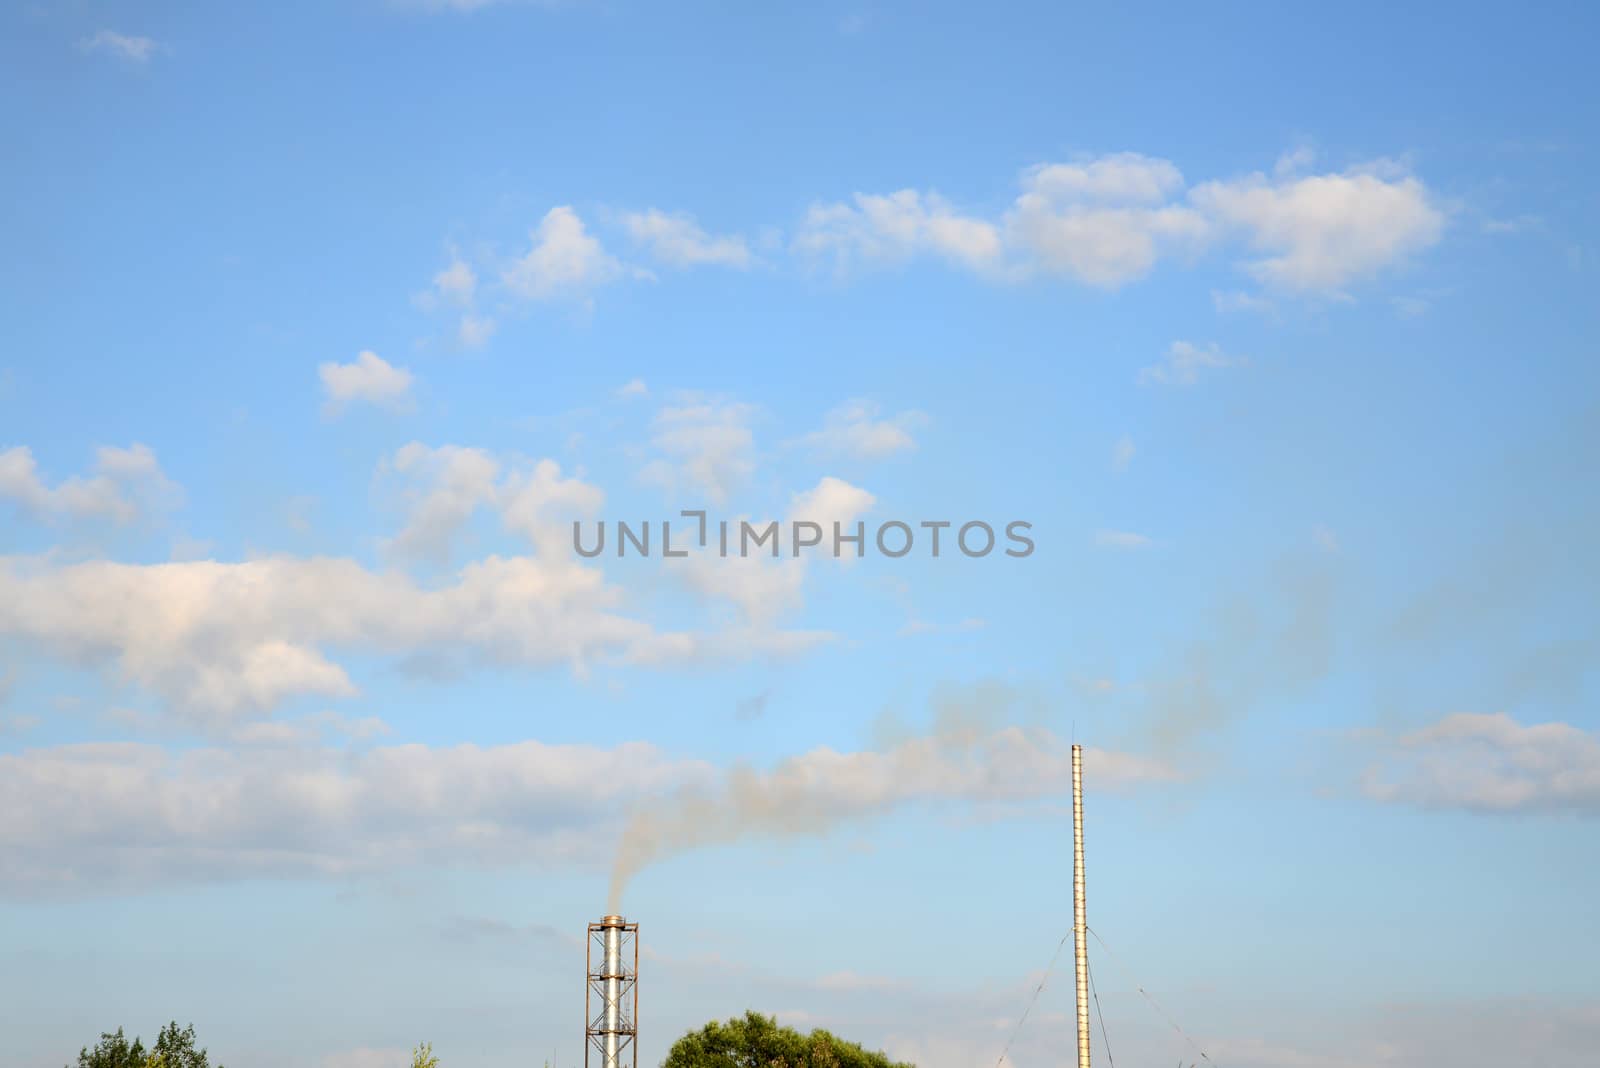 Photo of industrial smoke from a chimney on a blue sky. Illustration of industrial pollution, environmental problems.
Taken in Riga, Latvia.